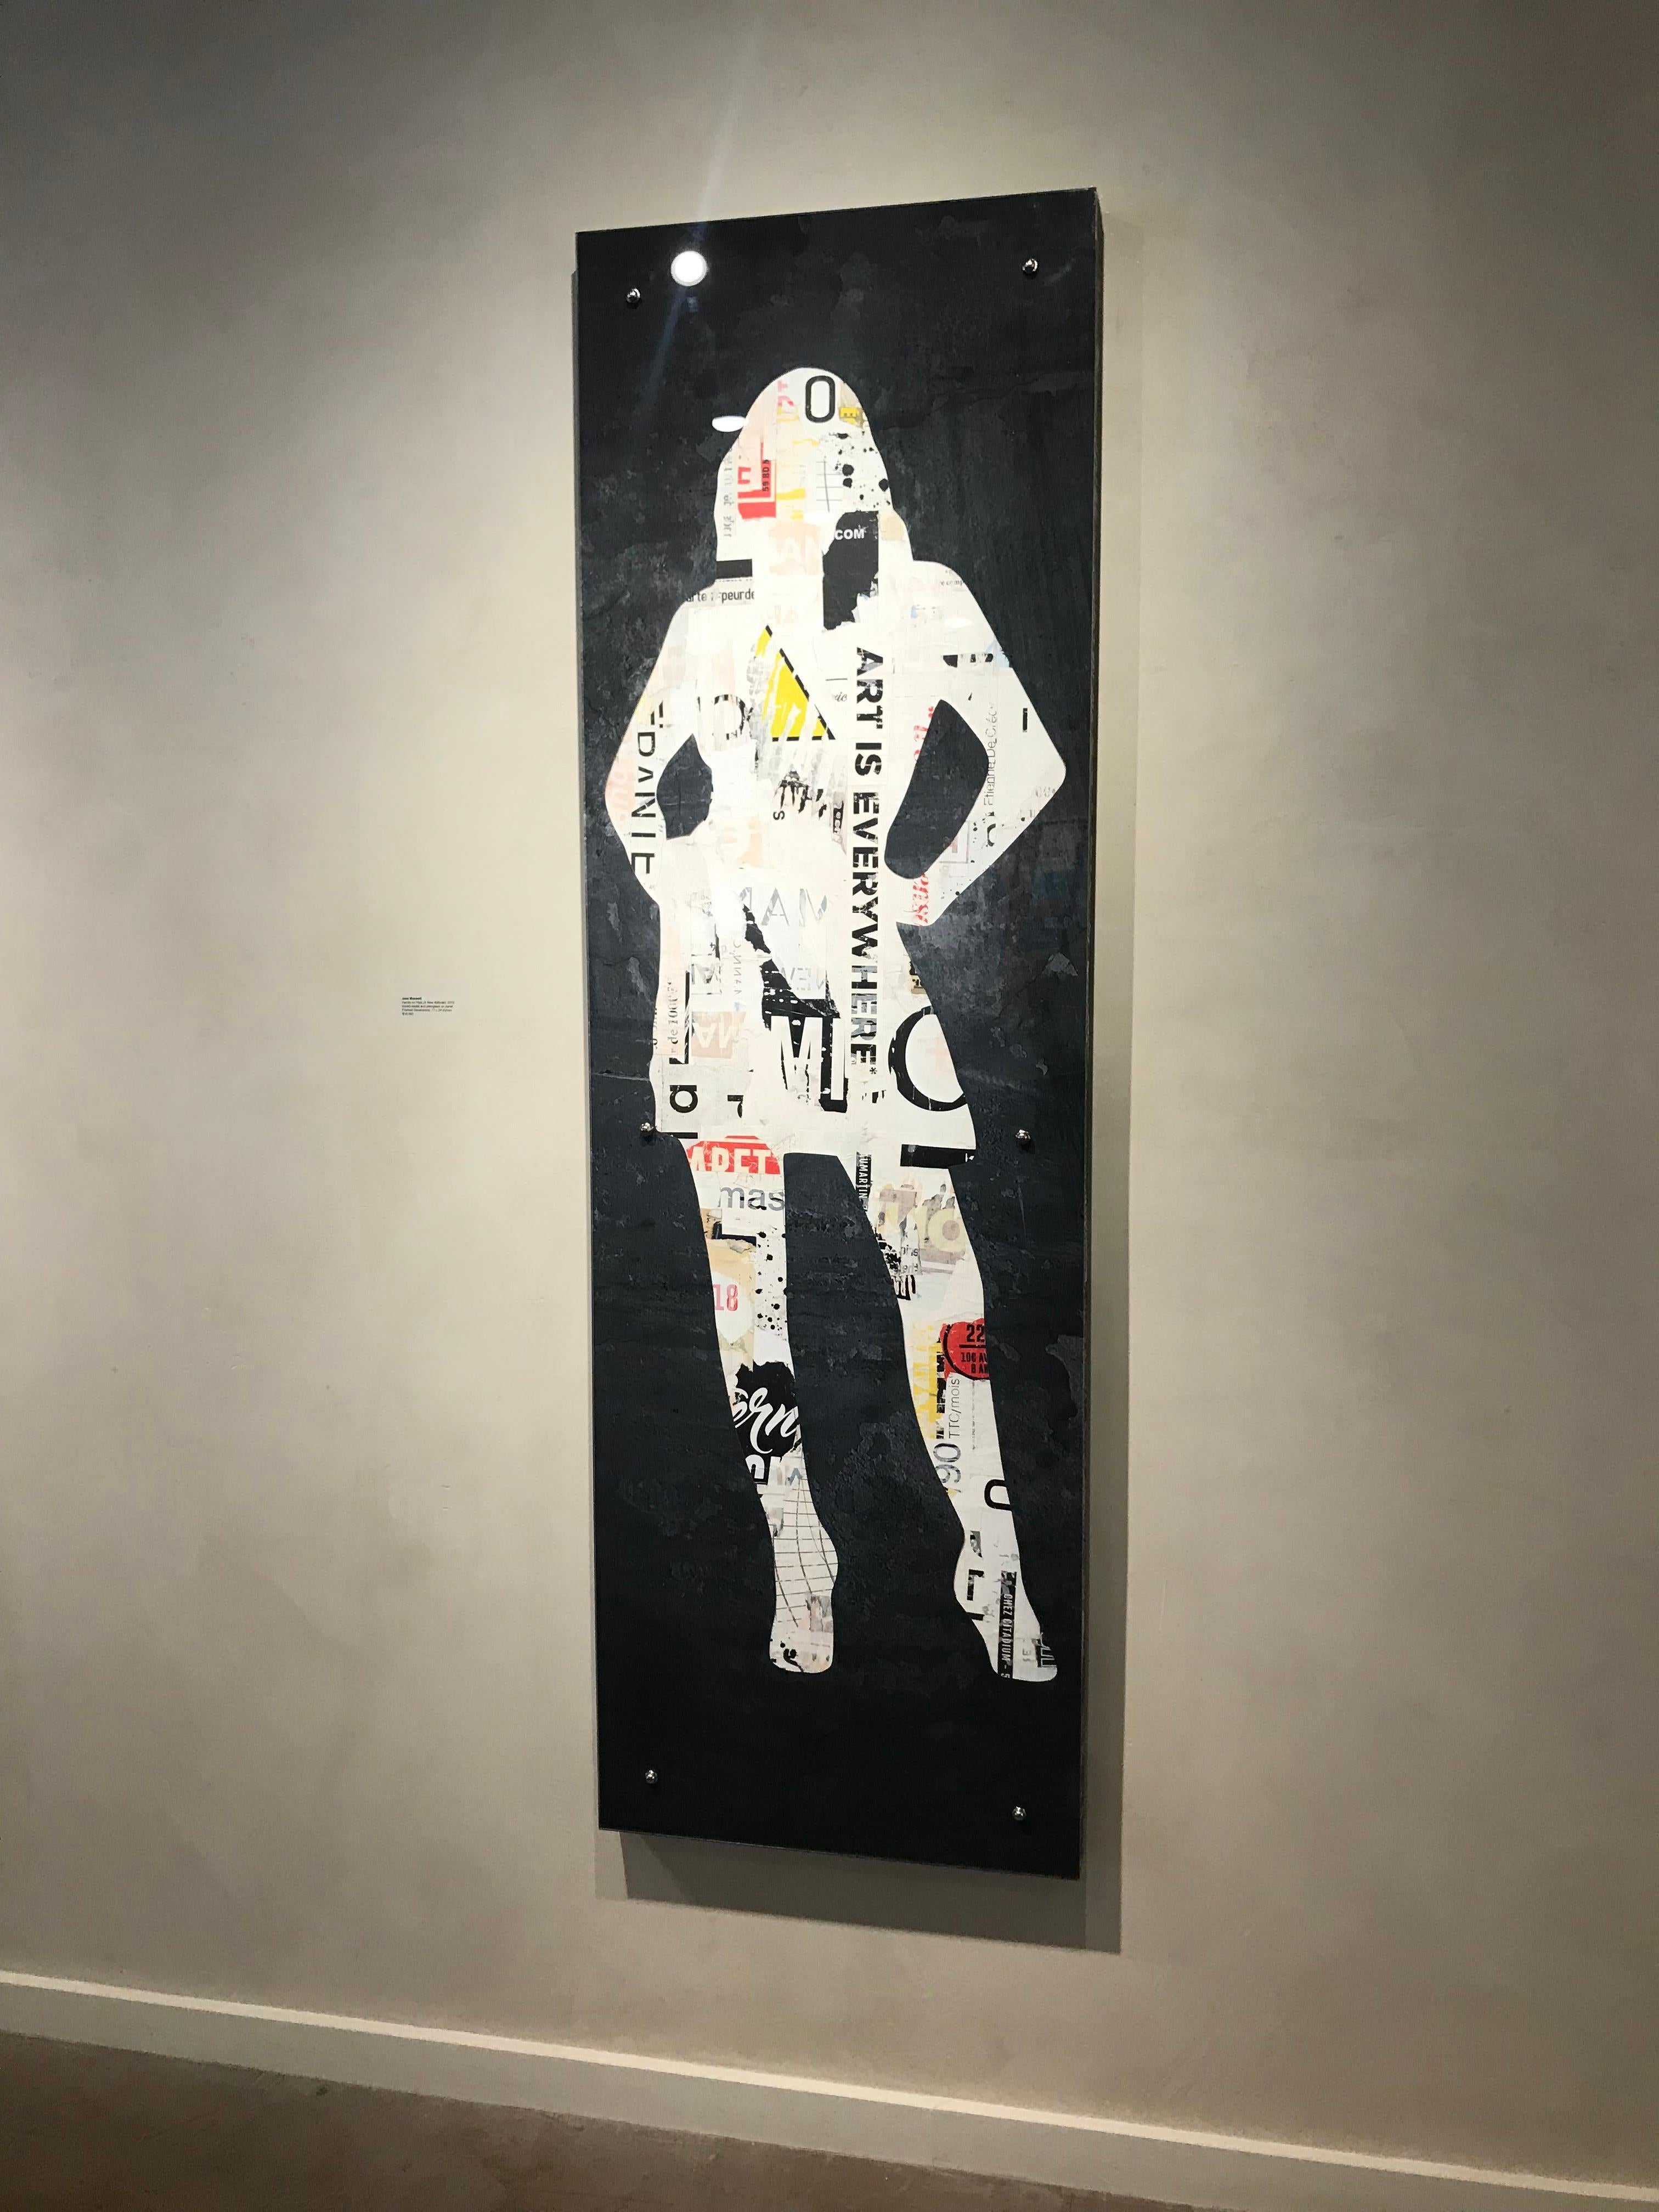 This grey and white mixed media painting by Jane Maxwell shows a  life size silhouette of a female figure in a powerful stance. 
Known for her mixed media inspired by fashion Jane Maxwell combines billboardesque backgrounds with seated women on a